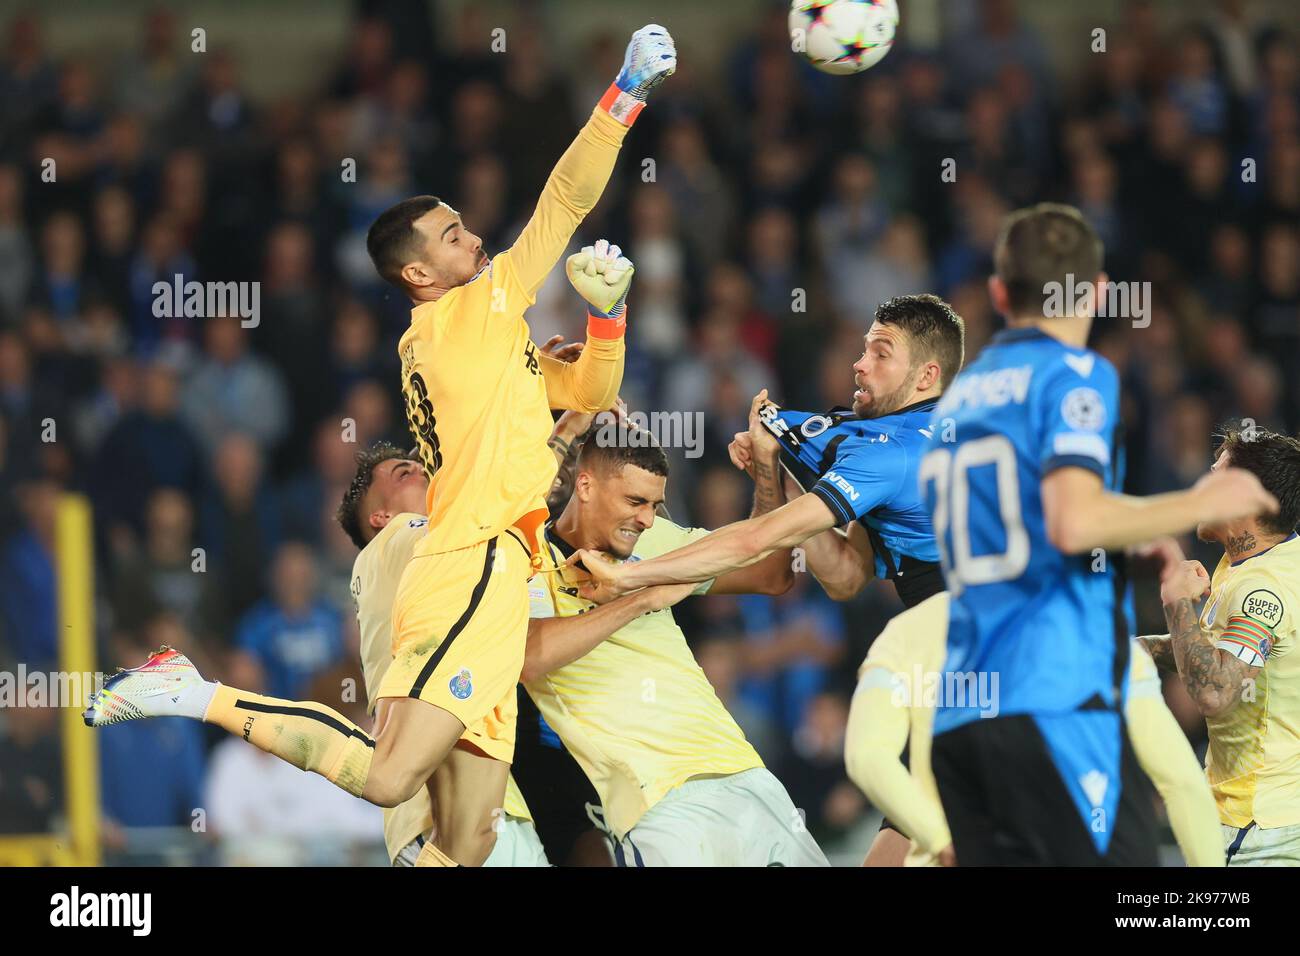 Brugge, Belgium, 26 October 2022, Porto's goalkeeper Diogo Costa and Club's Brandon Mechele fight for the ball during the match between Belgian soccer team Club Brugge KV and Portuguese FC Porto , Wednesday 26 October 2022 in Brugge, Belgium, the fifth game in the UEFA Champions League group stage. BELGA PHOTO BRUNO FAHY Stock Photo